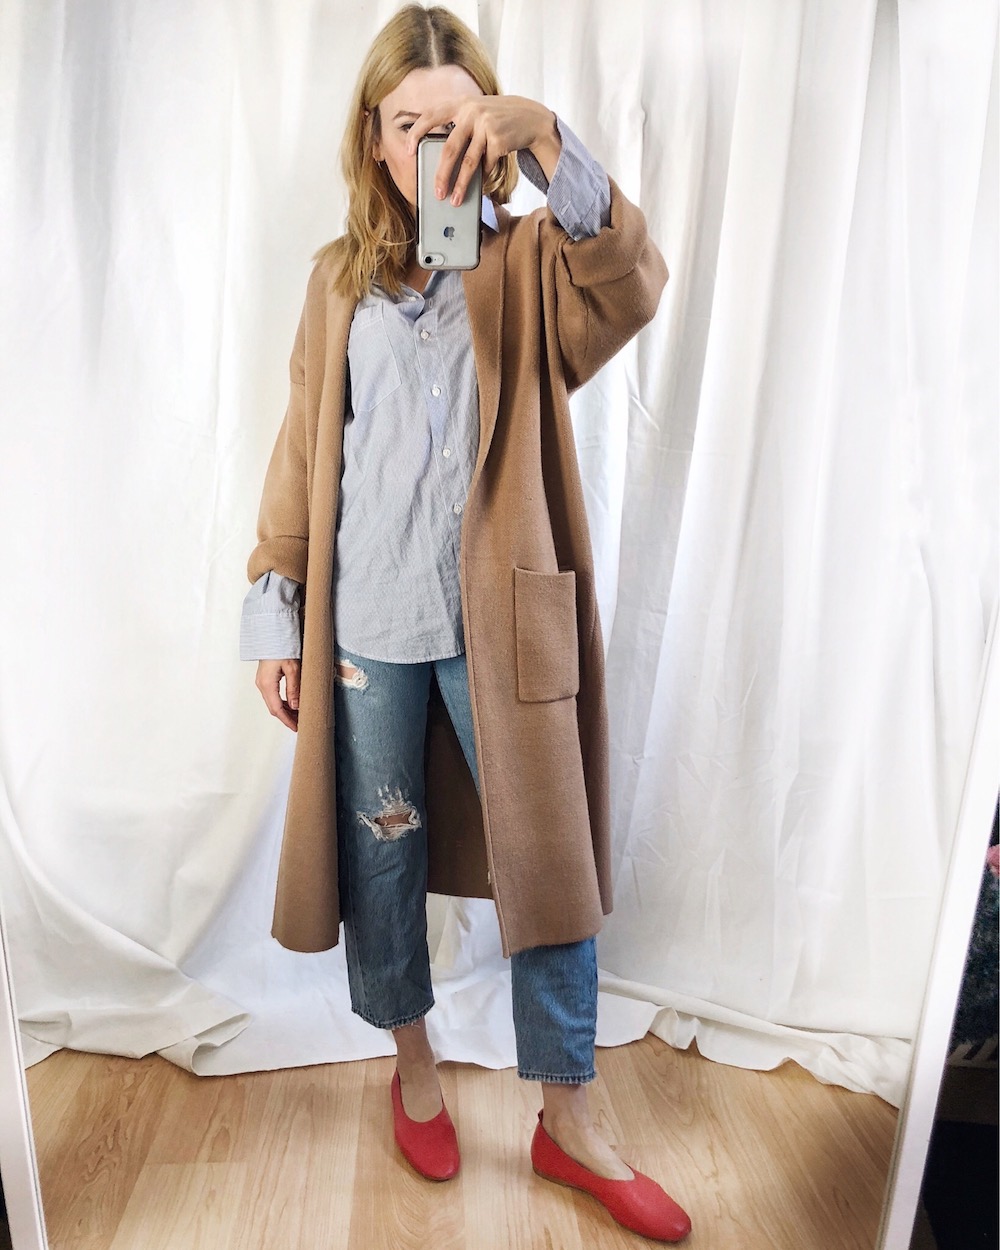 What I Wore this week | Blue Blouse | Levis | Long Cardigan I Red Everlane Day Glove Flats | livelovesara